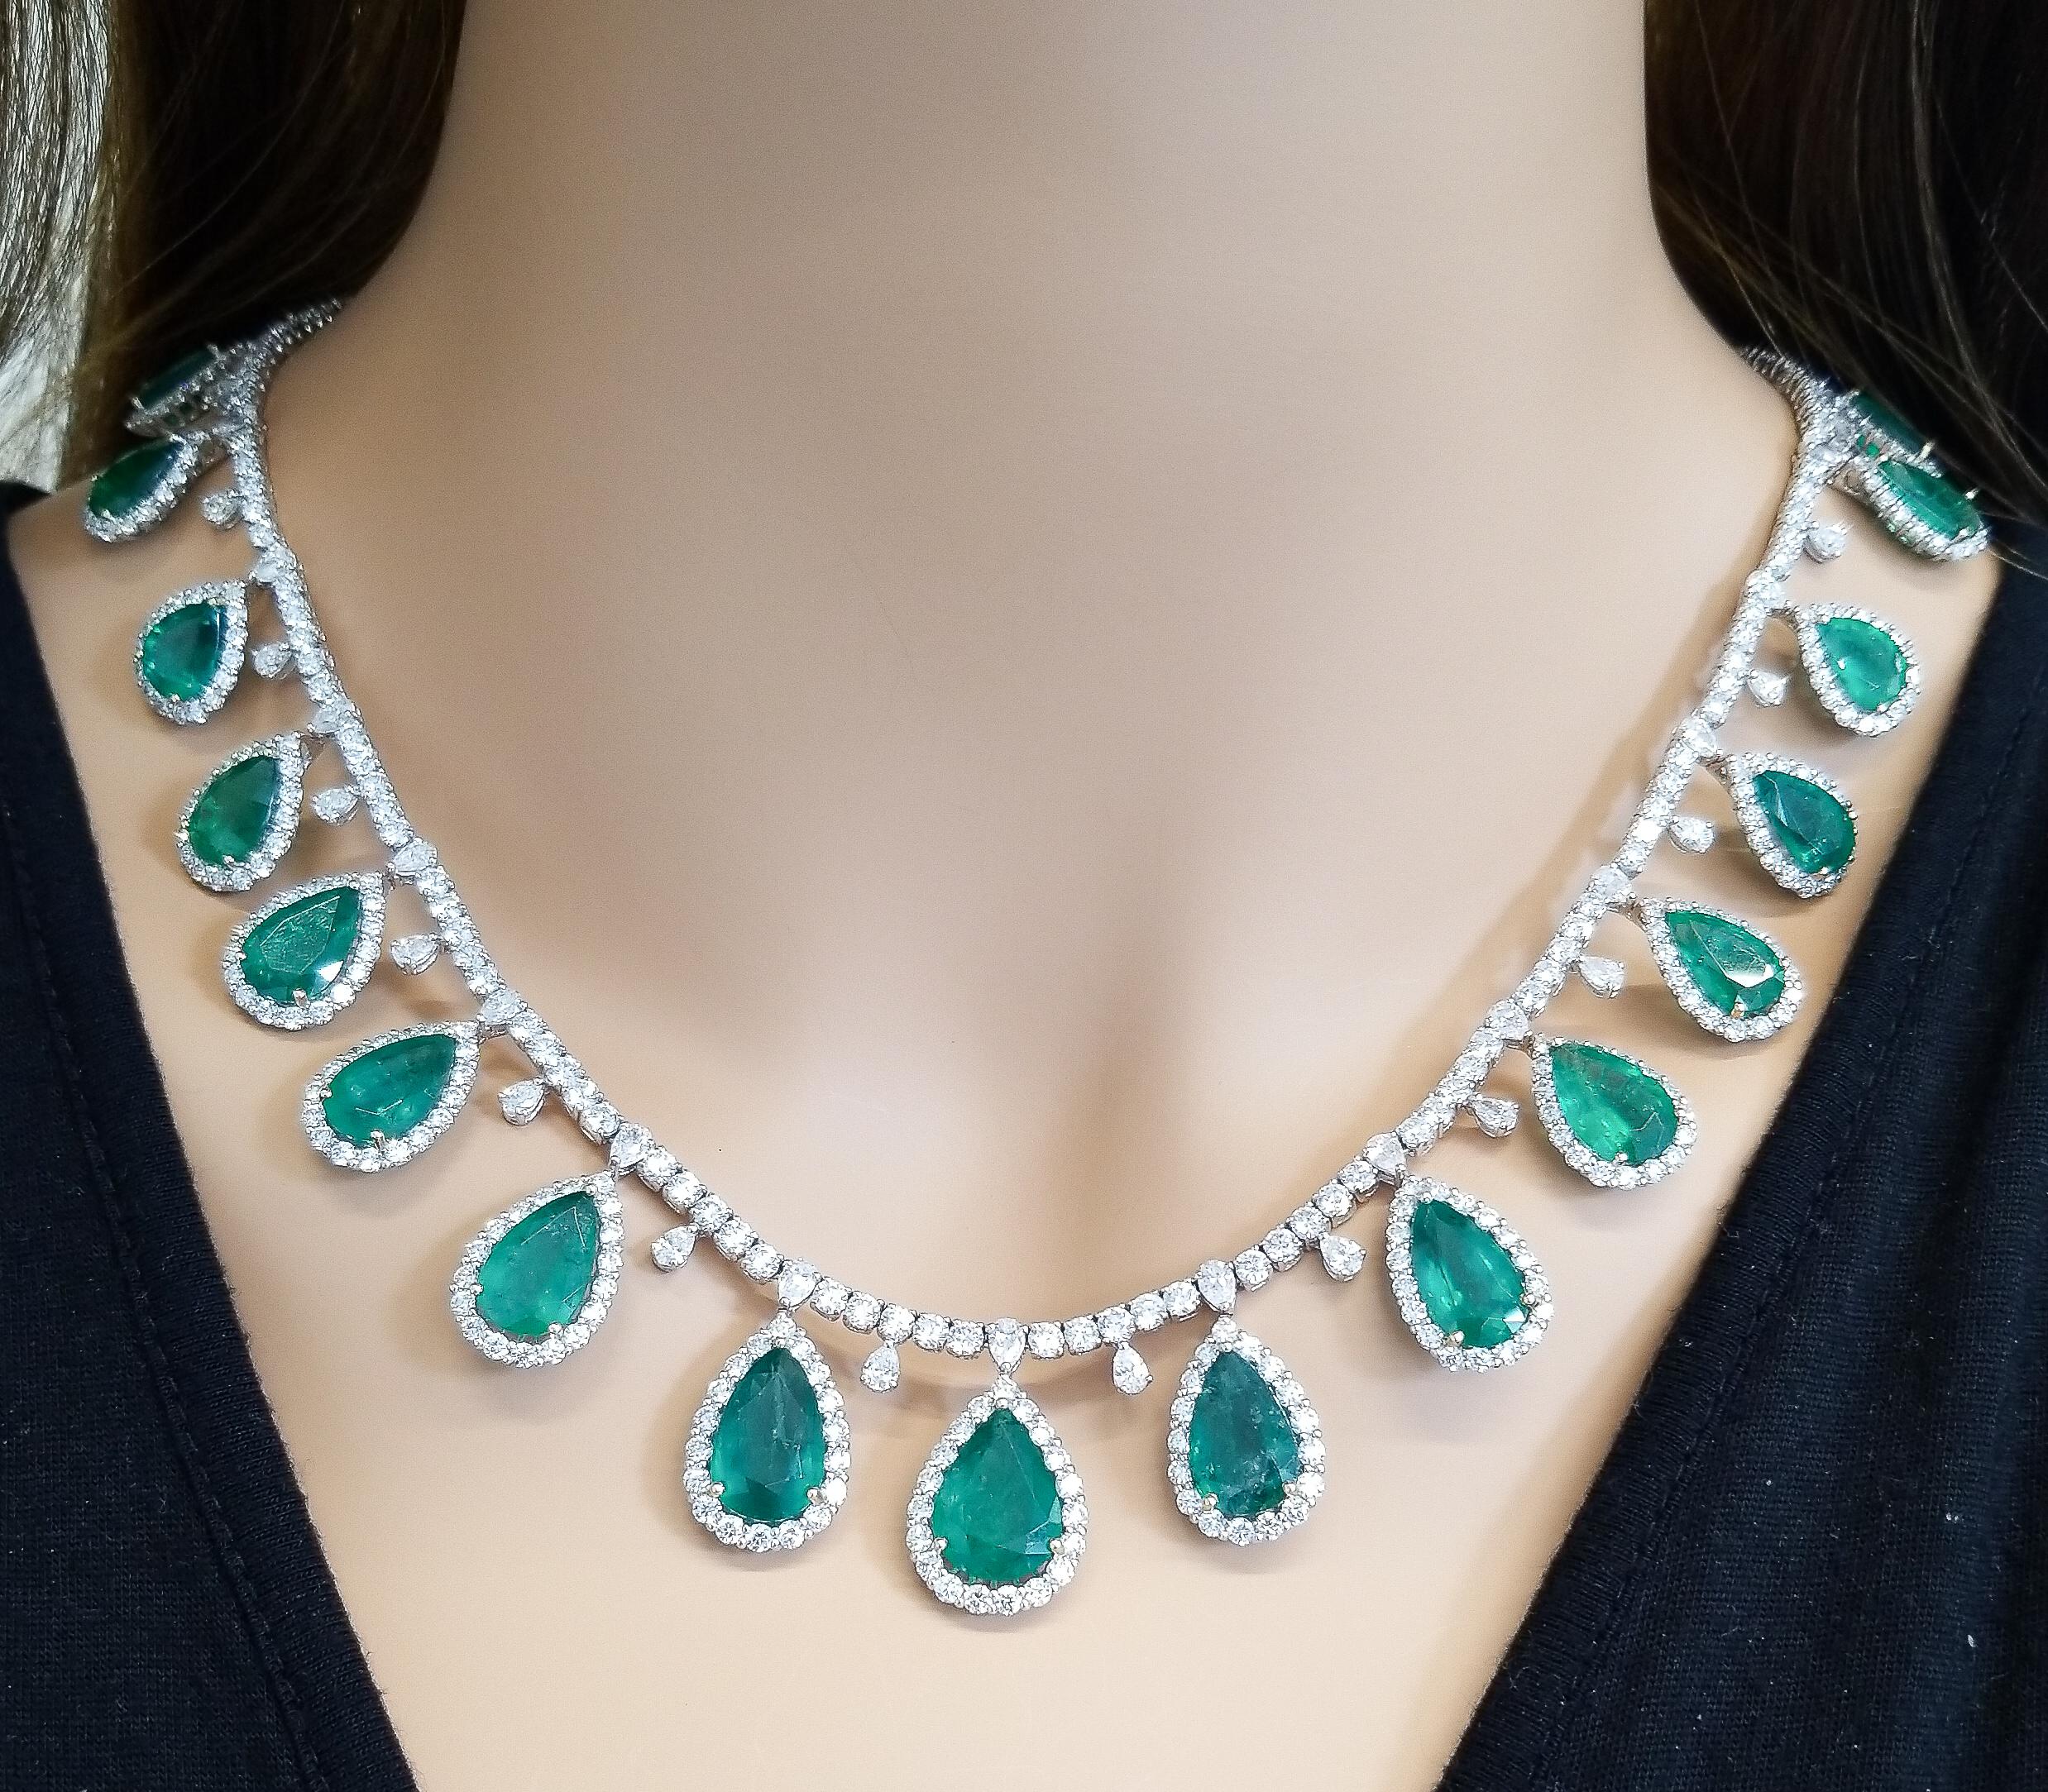 50.34 Carat Total Pear Shaped Emerald and Diamond Necklace in 18 Karat Gold Damen